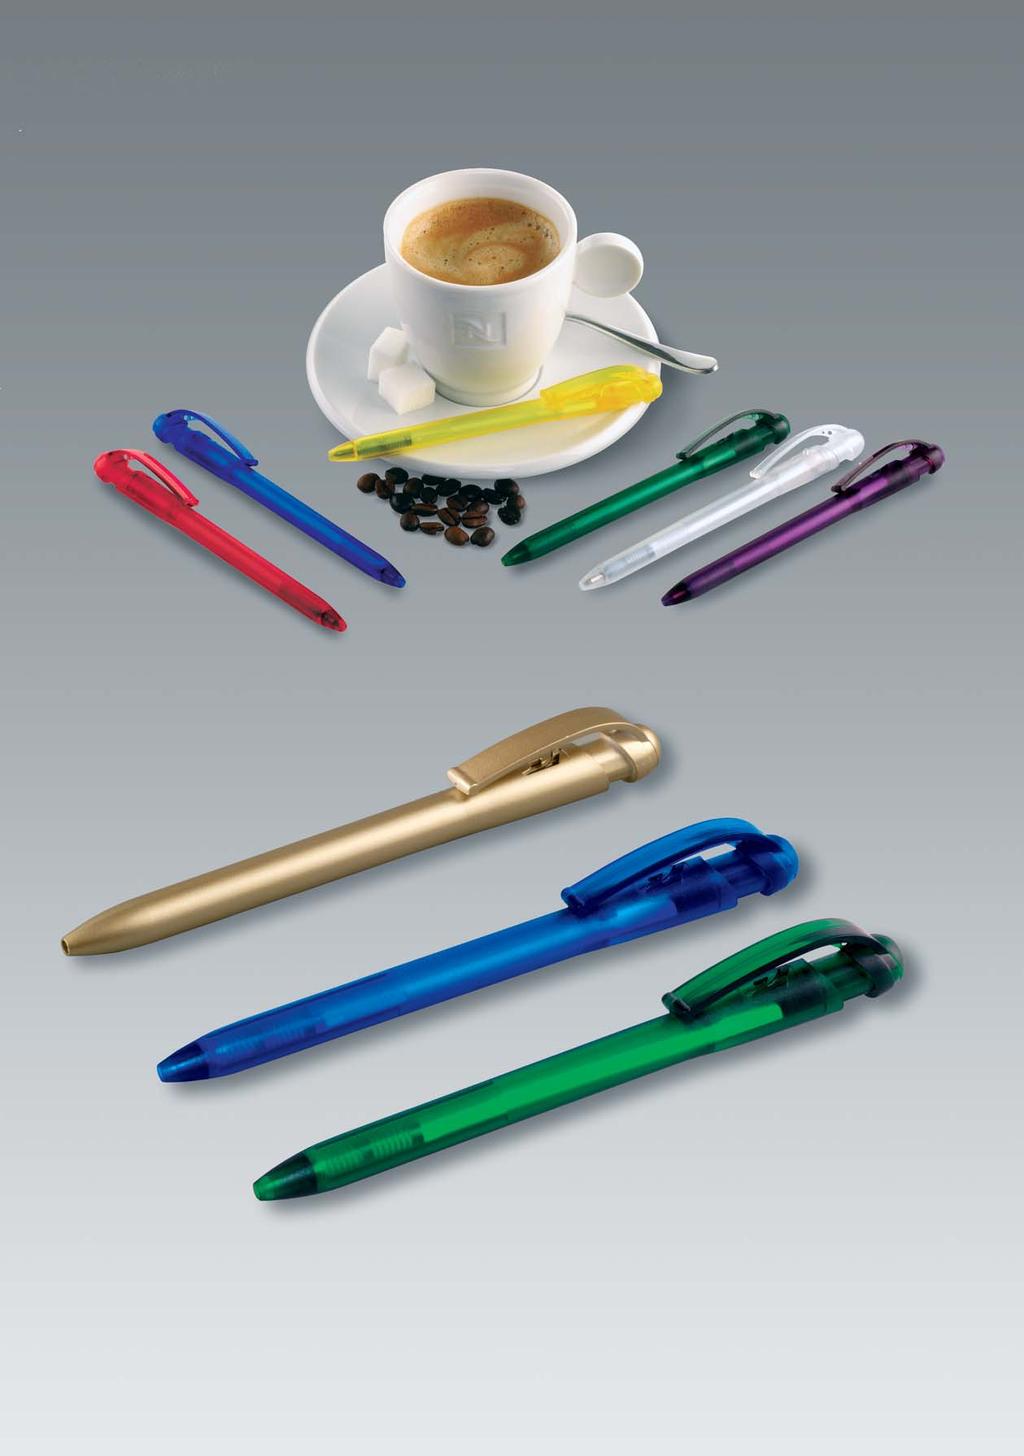 Article 113 gold: ball pen LUIGI gold colored X20 plastic refill, blue ink Article